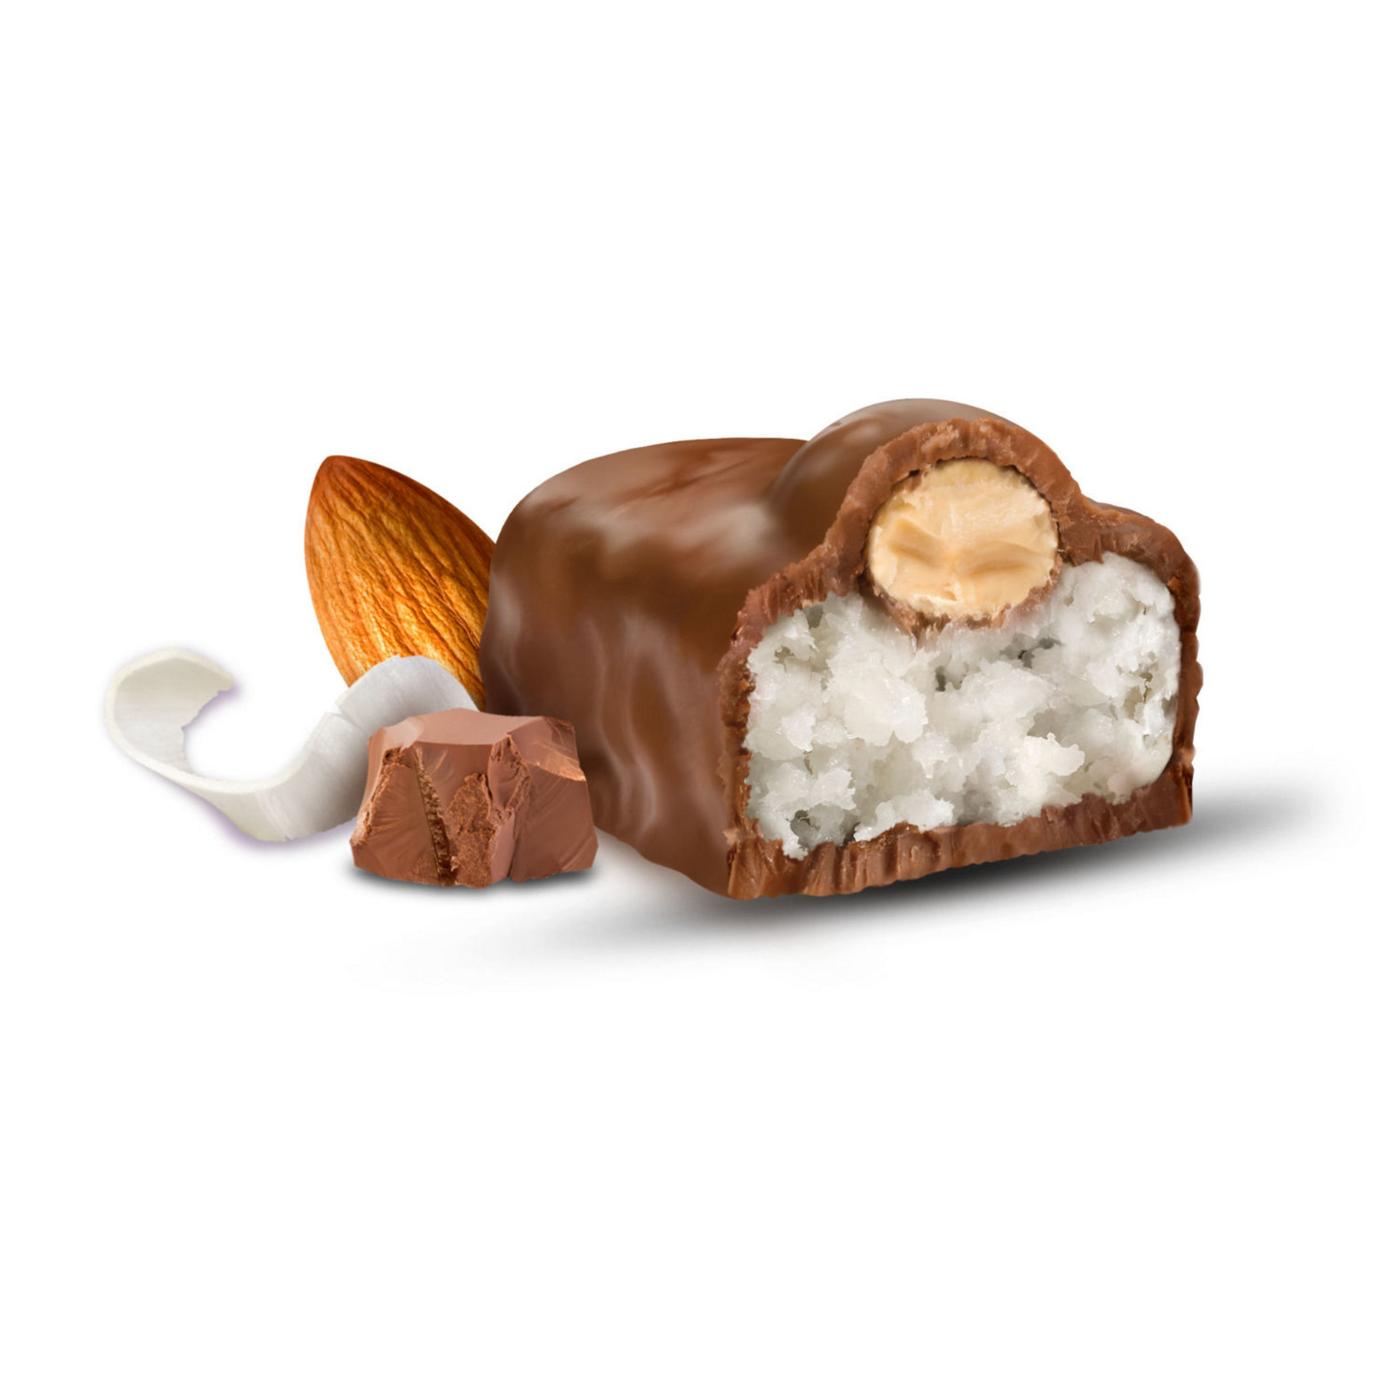 Almond Joy Miniatures Coconut & Almond Chocolate Candy - Share Pack; image 5 of 7